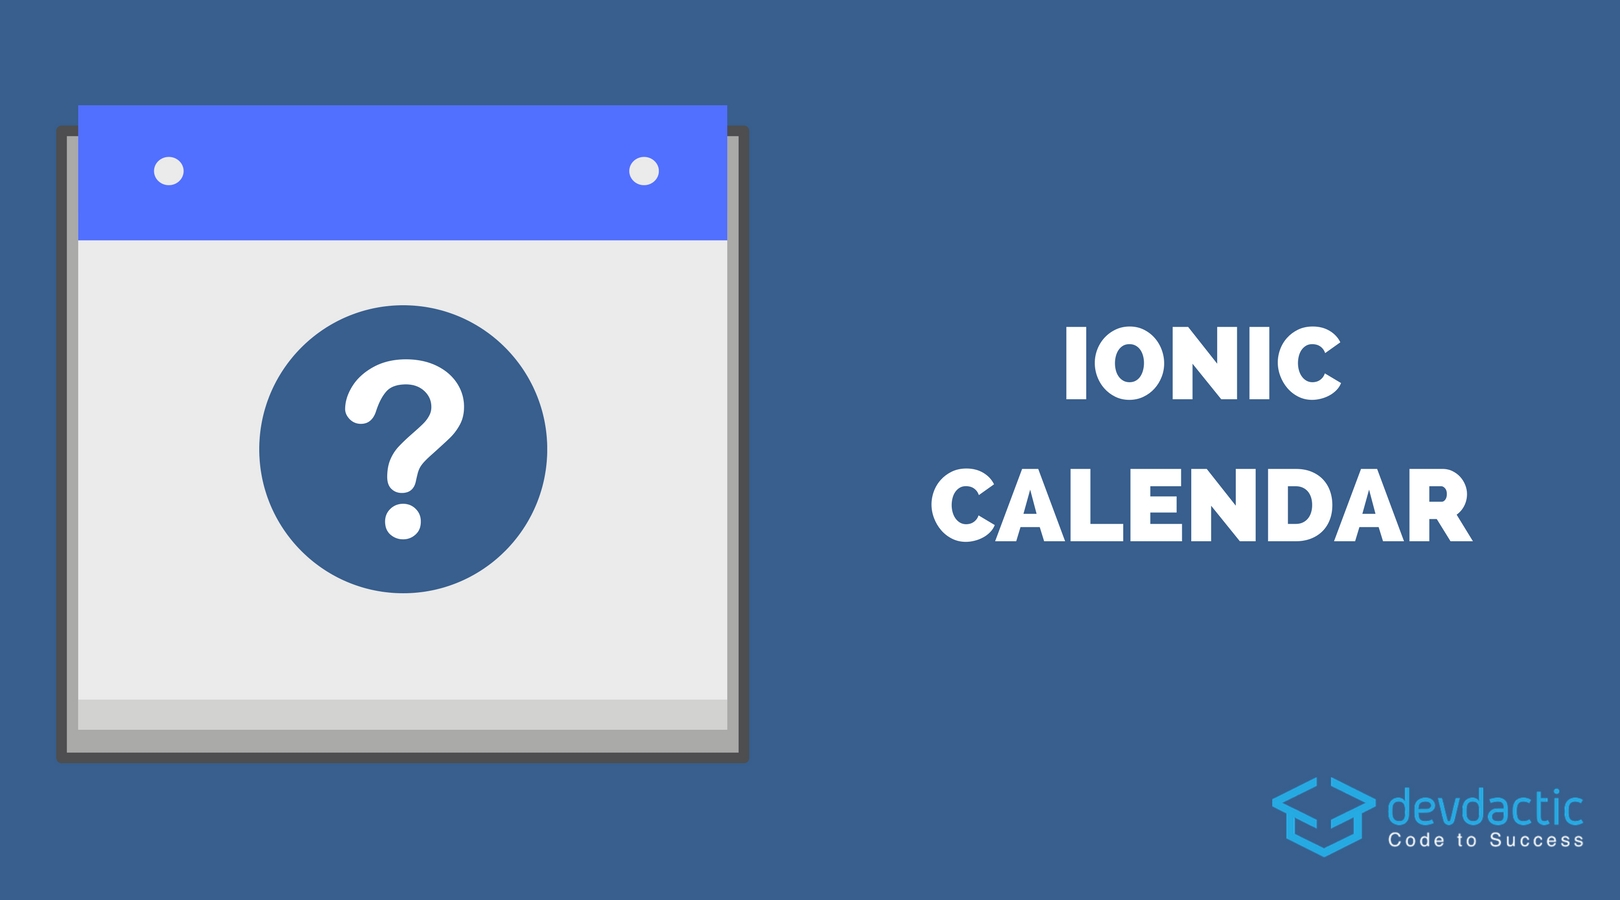 Building A Calendar For Ionic With Angular Calendar &amp; Calendar Ionic 2 Calendar Icon